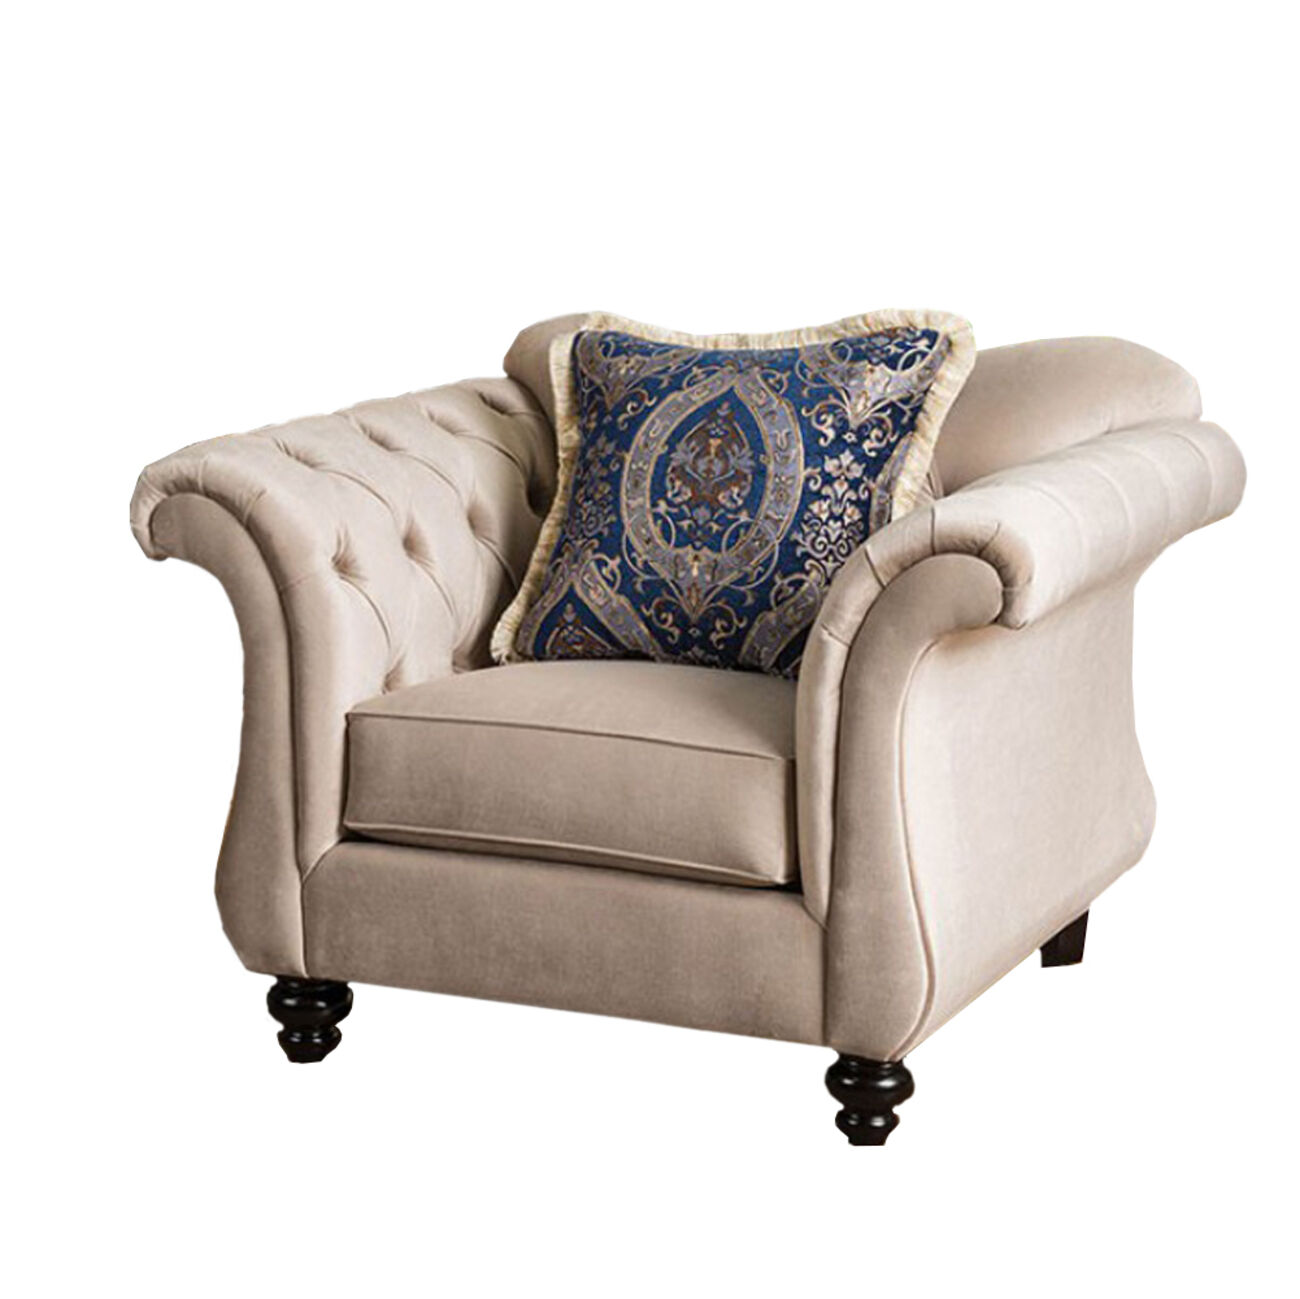 Luxurious Chesterfield Inspired Design Chair, Ivory